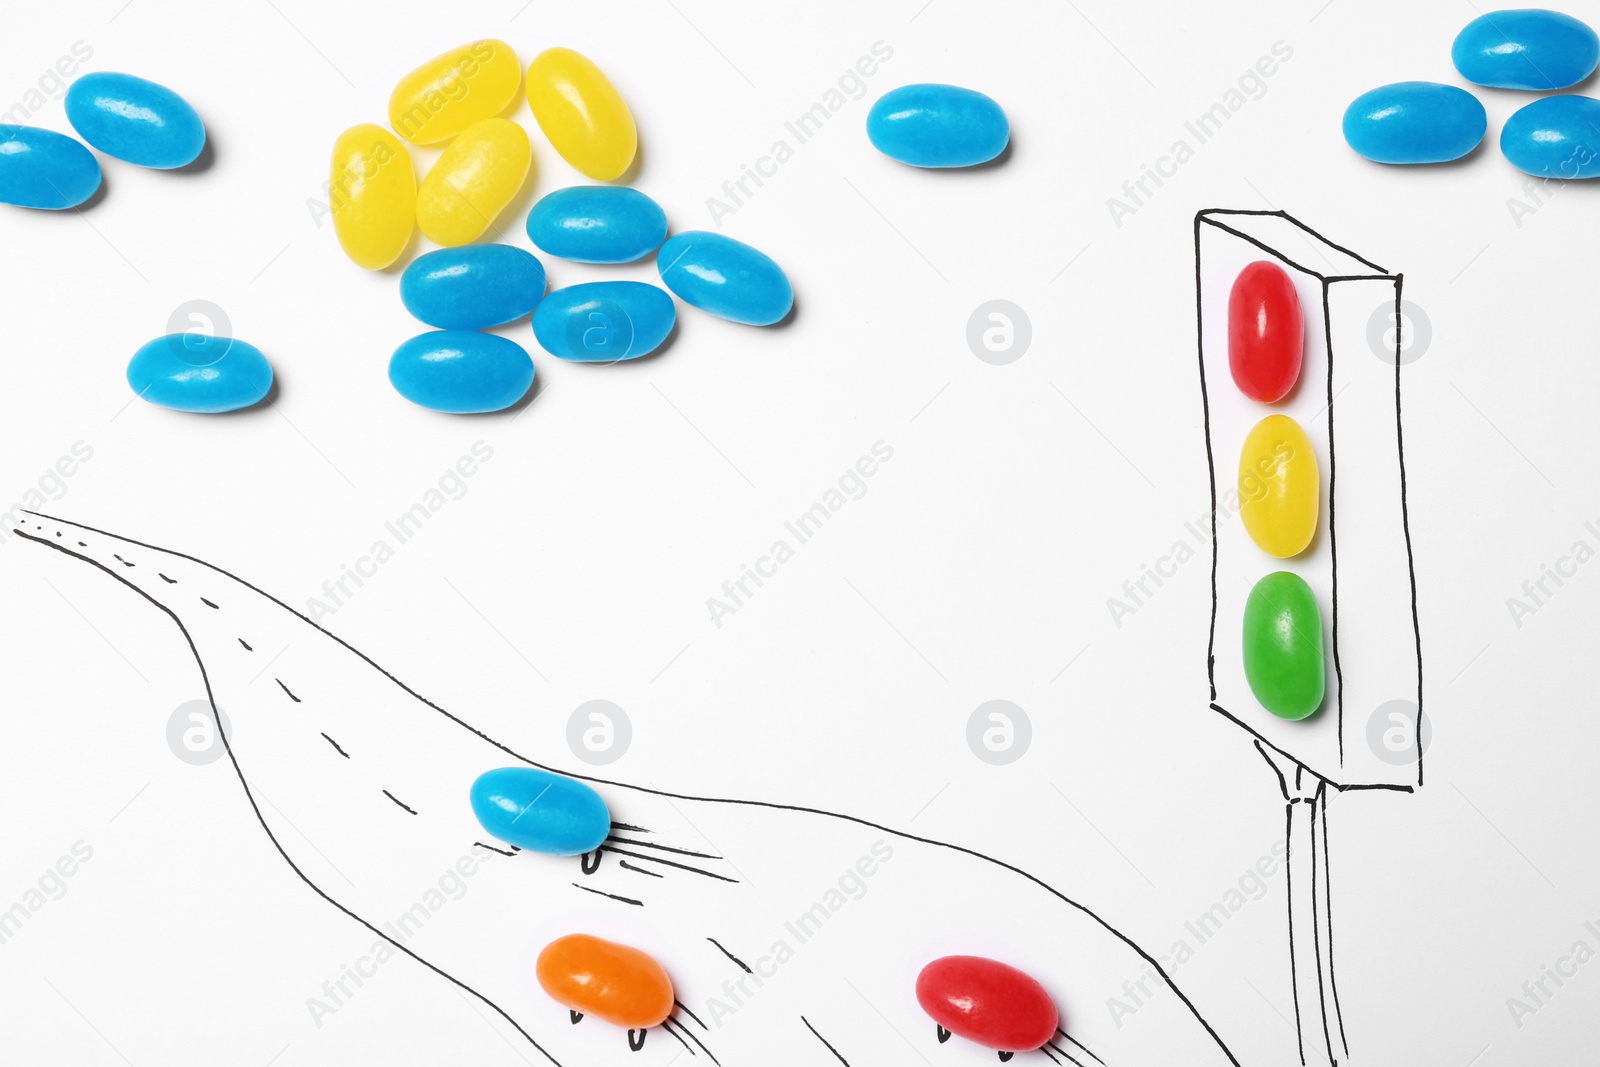 Photo of Colorful jelly candies arranged as traffic light and road with cars on white background, top view